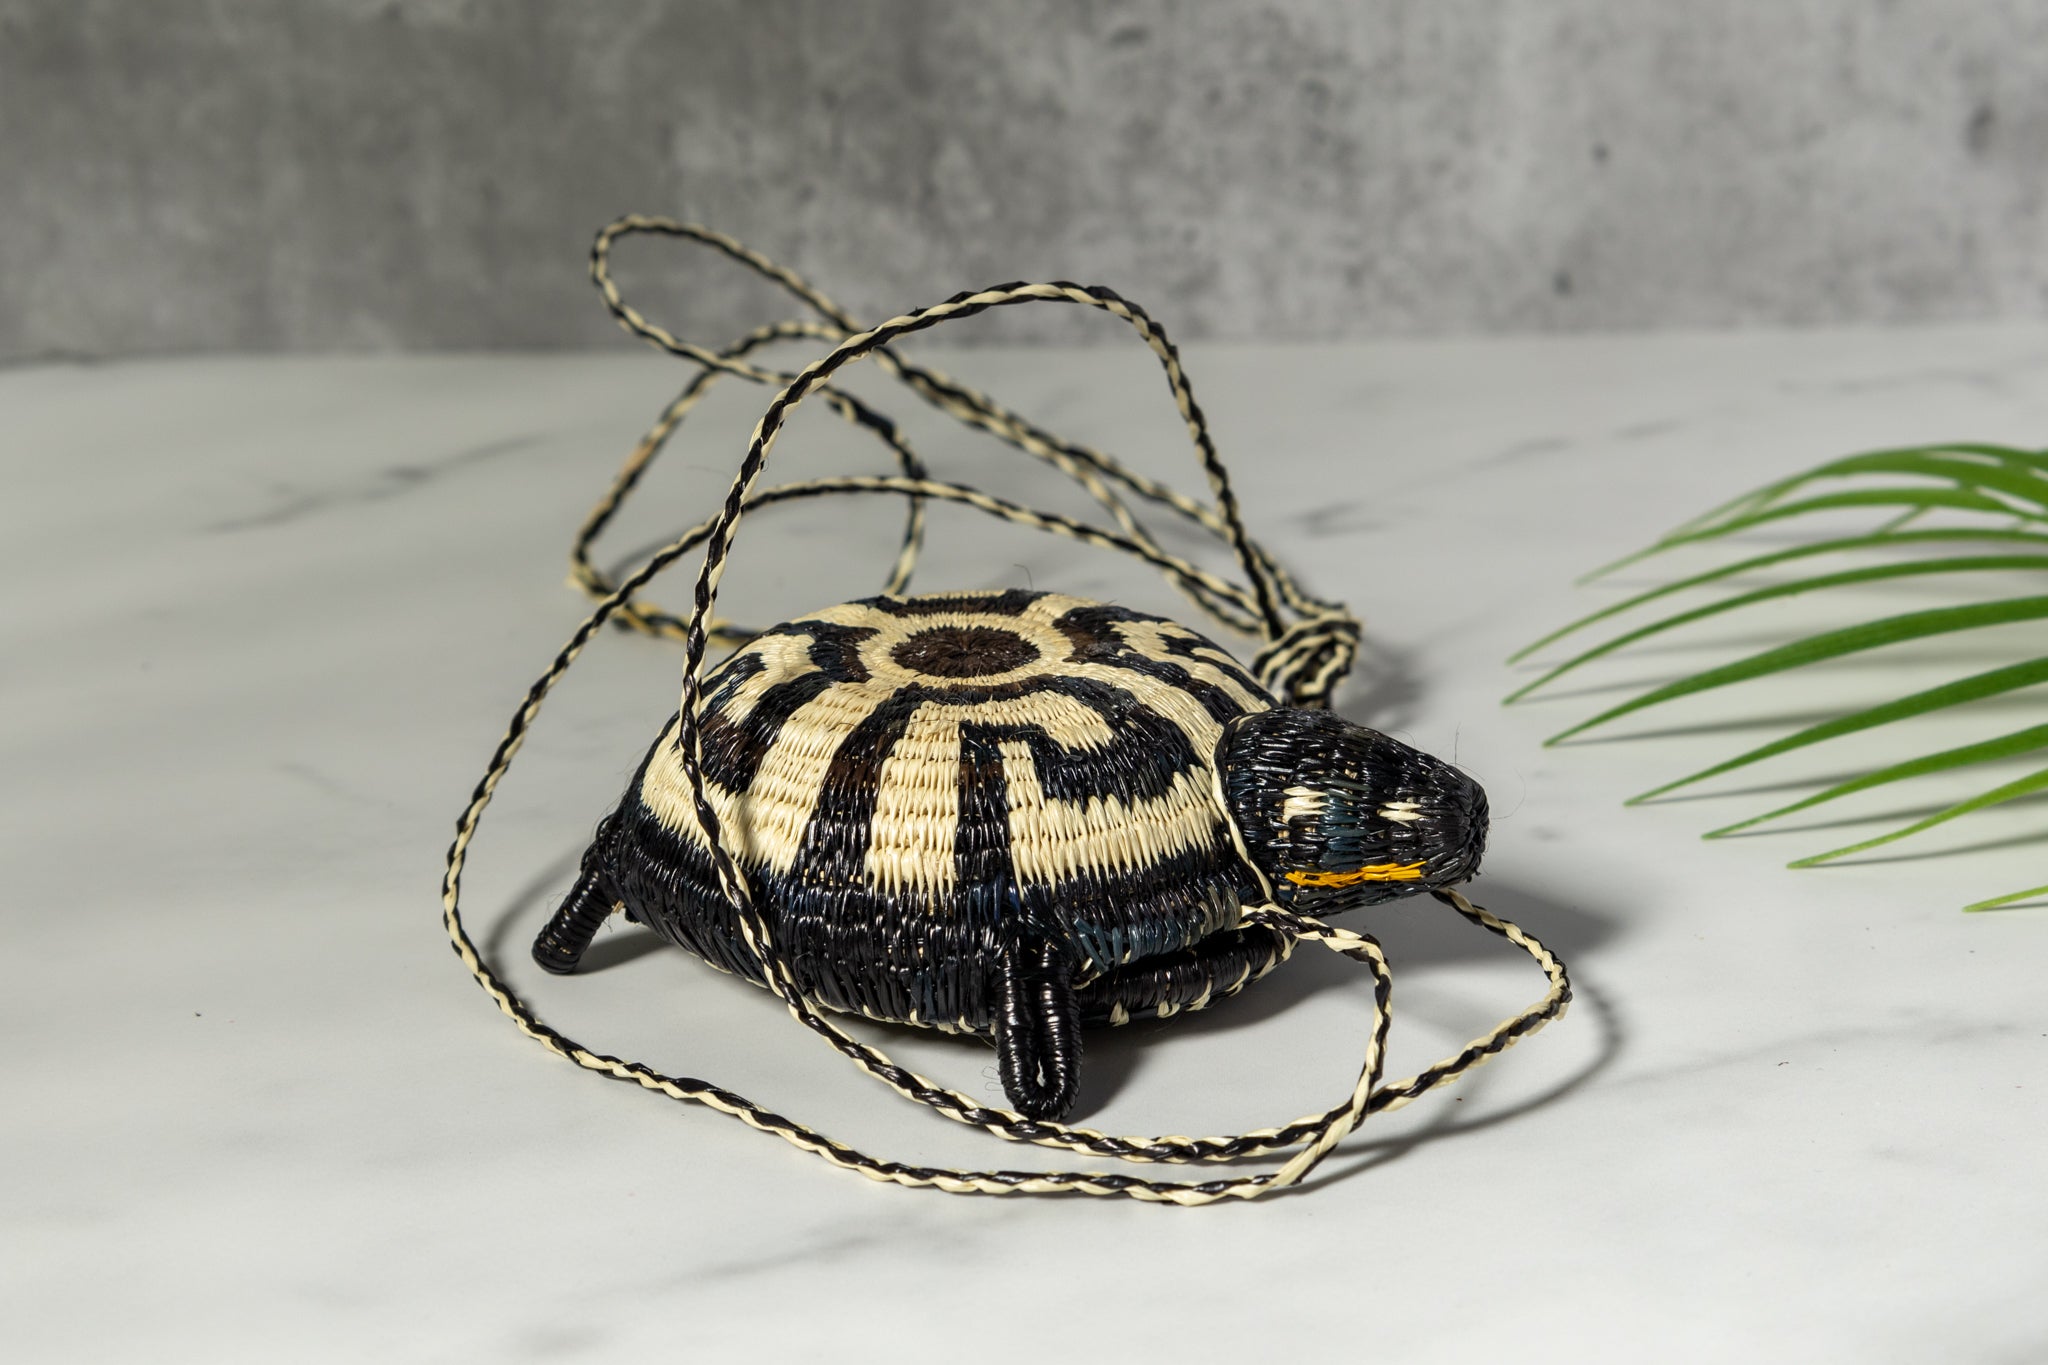 Black And White Turtle Purse Woven Basket